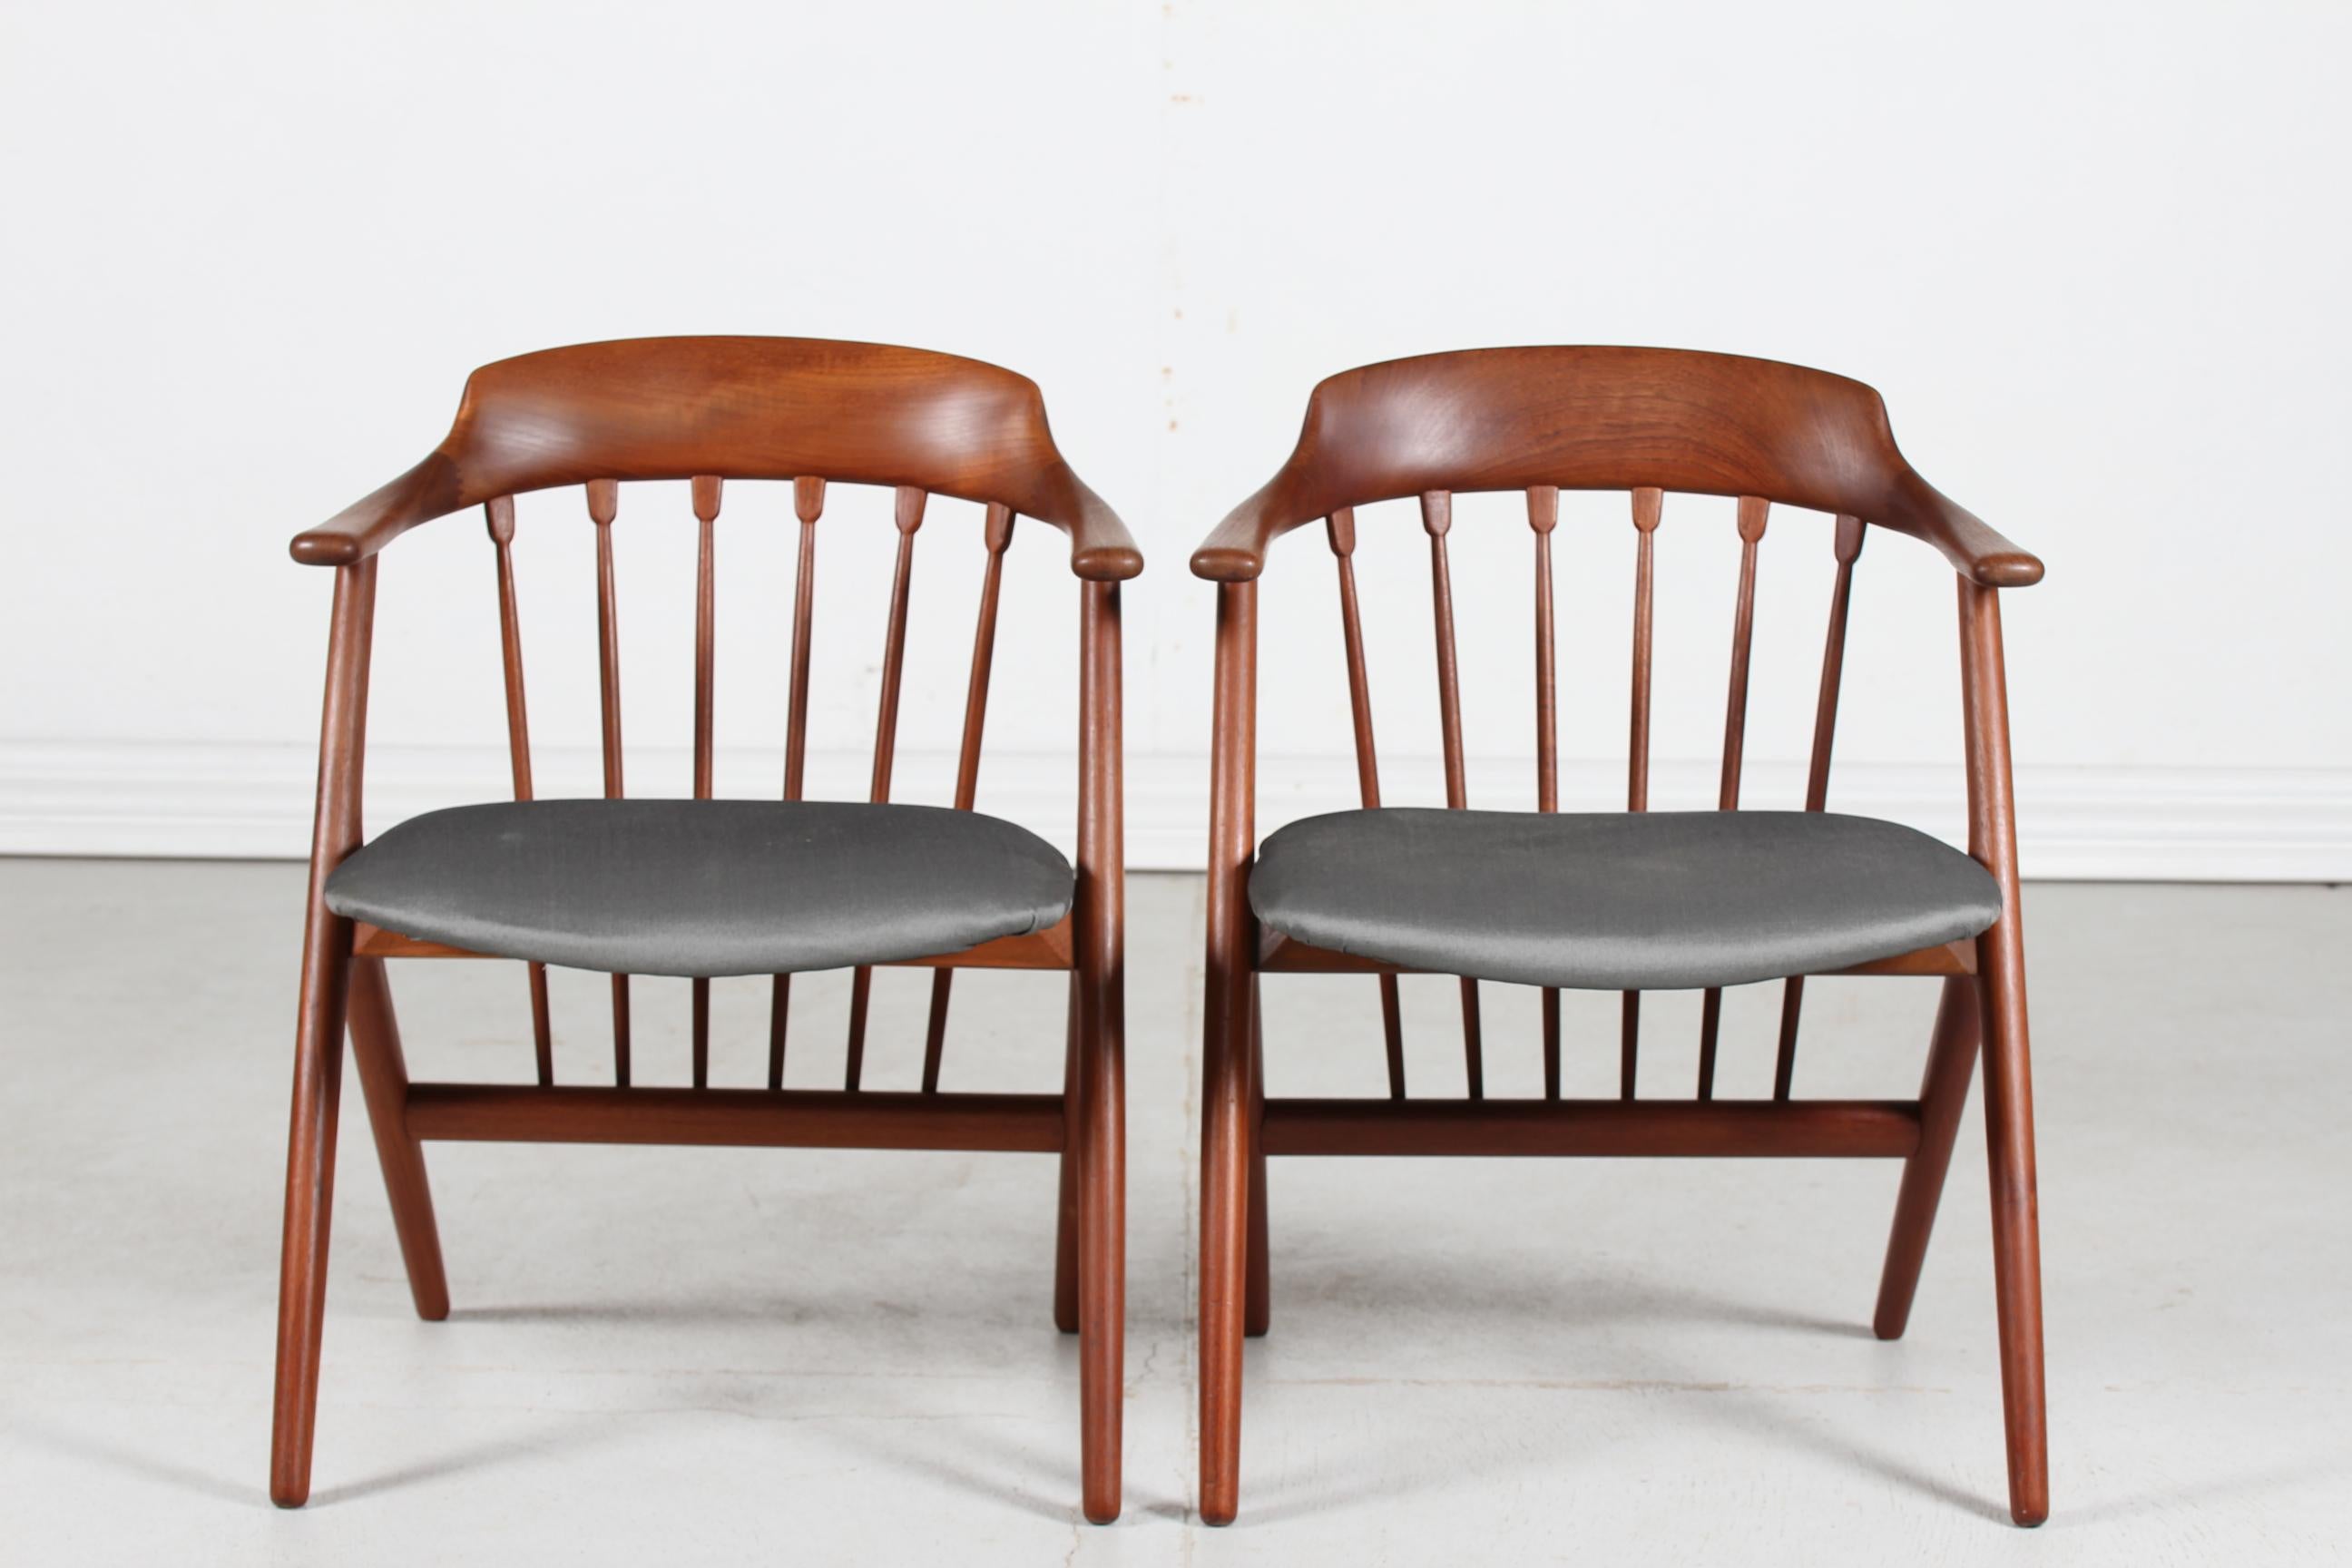 A pair of vintage sculptural armchairs in the style of Illum Wikkelsø.
The chairs are made of solid teak in delicate quality with used charcoal grey fabric.

They are made in the 1960´s by a Danish Furniture Manufacturer.

Nice vintage